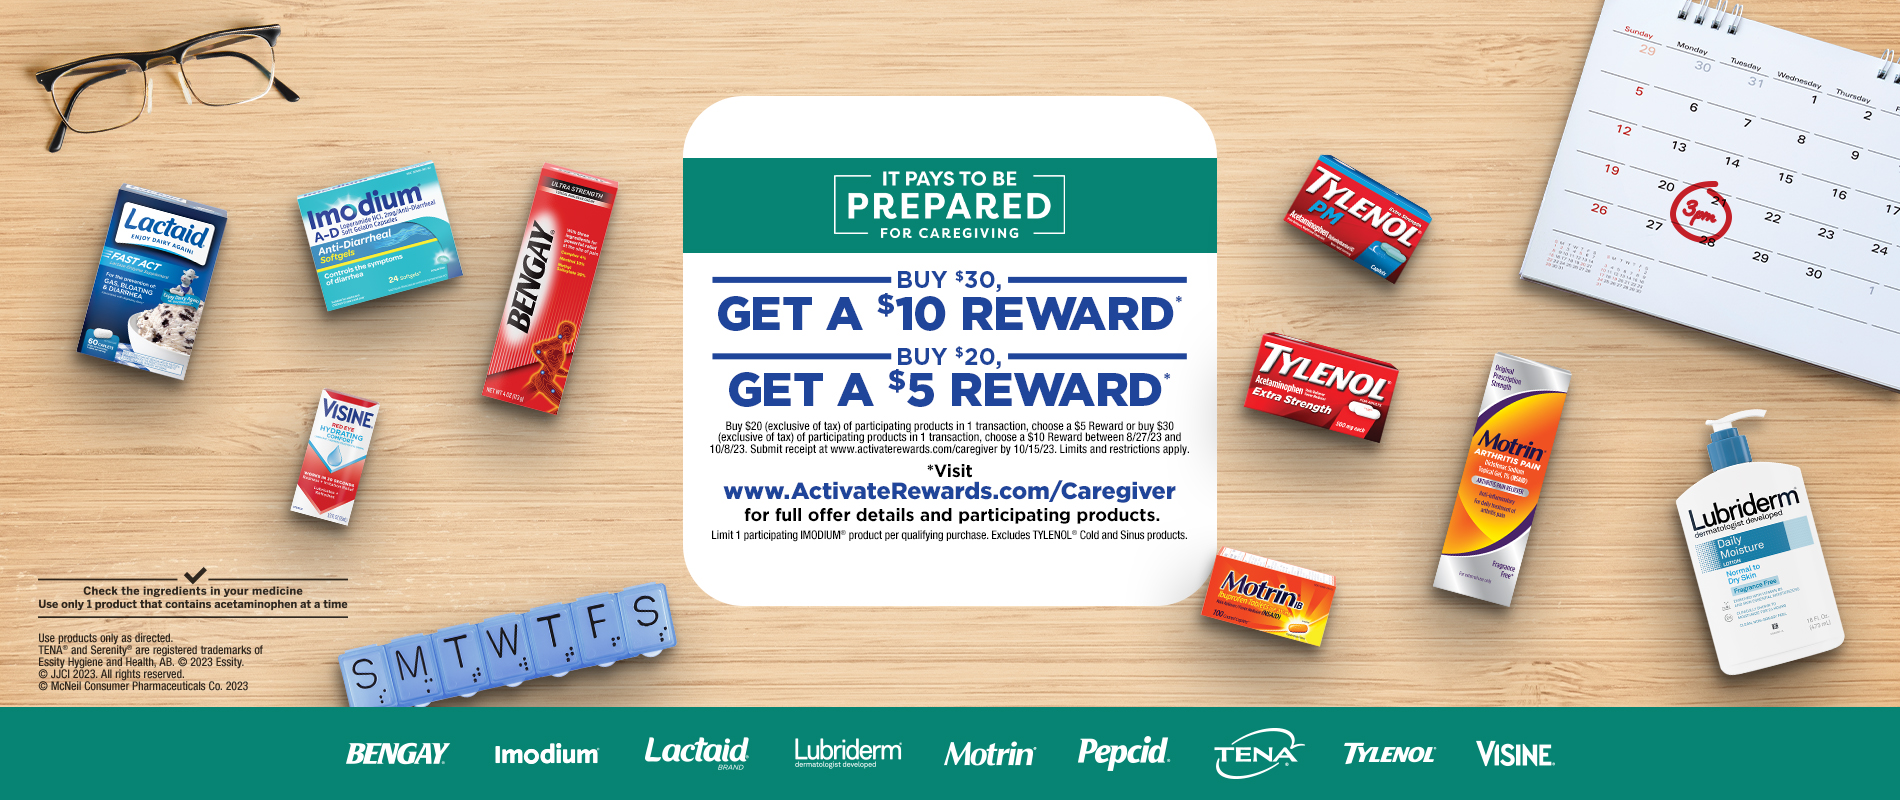 Get A $10 or $5 Reward When You Purchase Participating Products